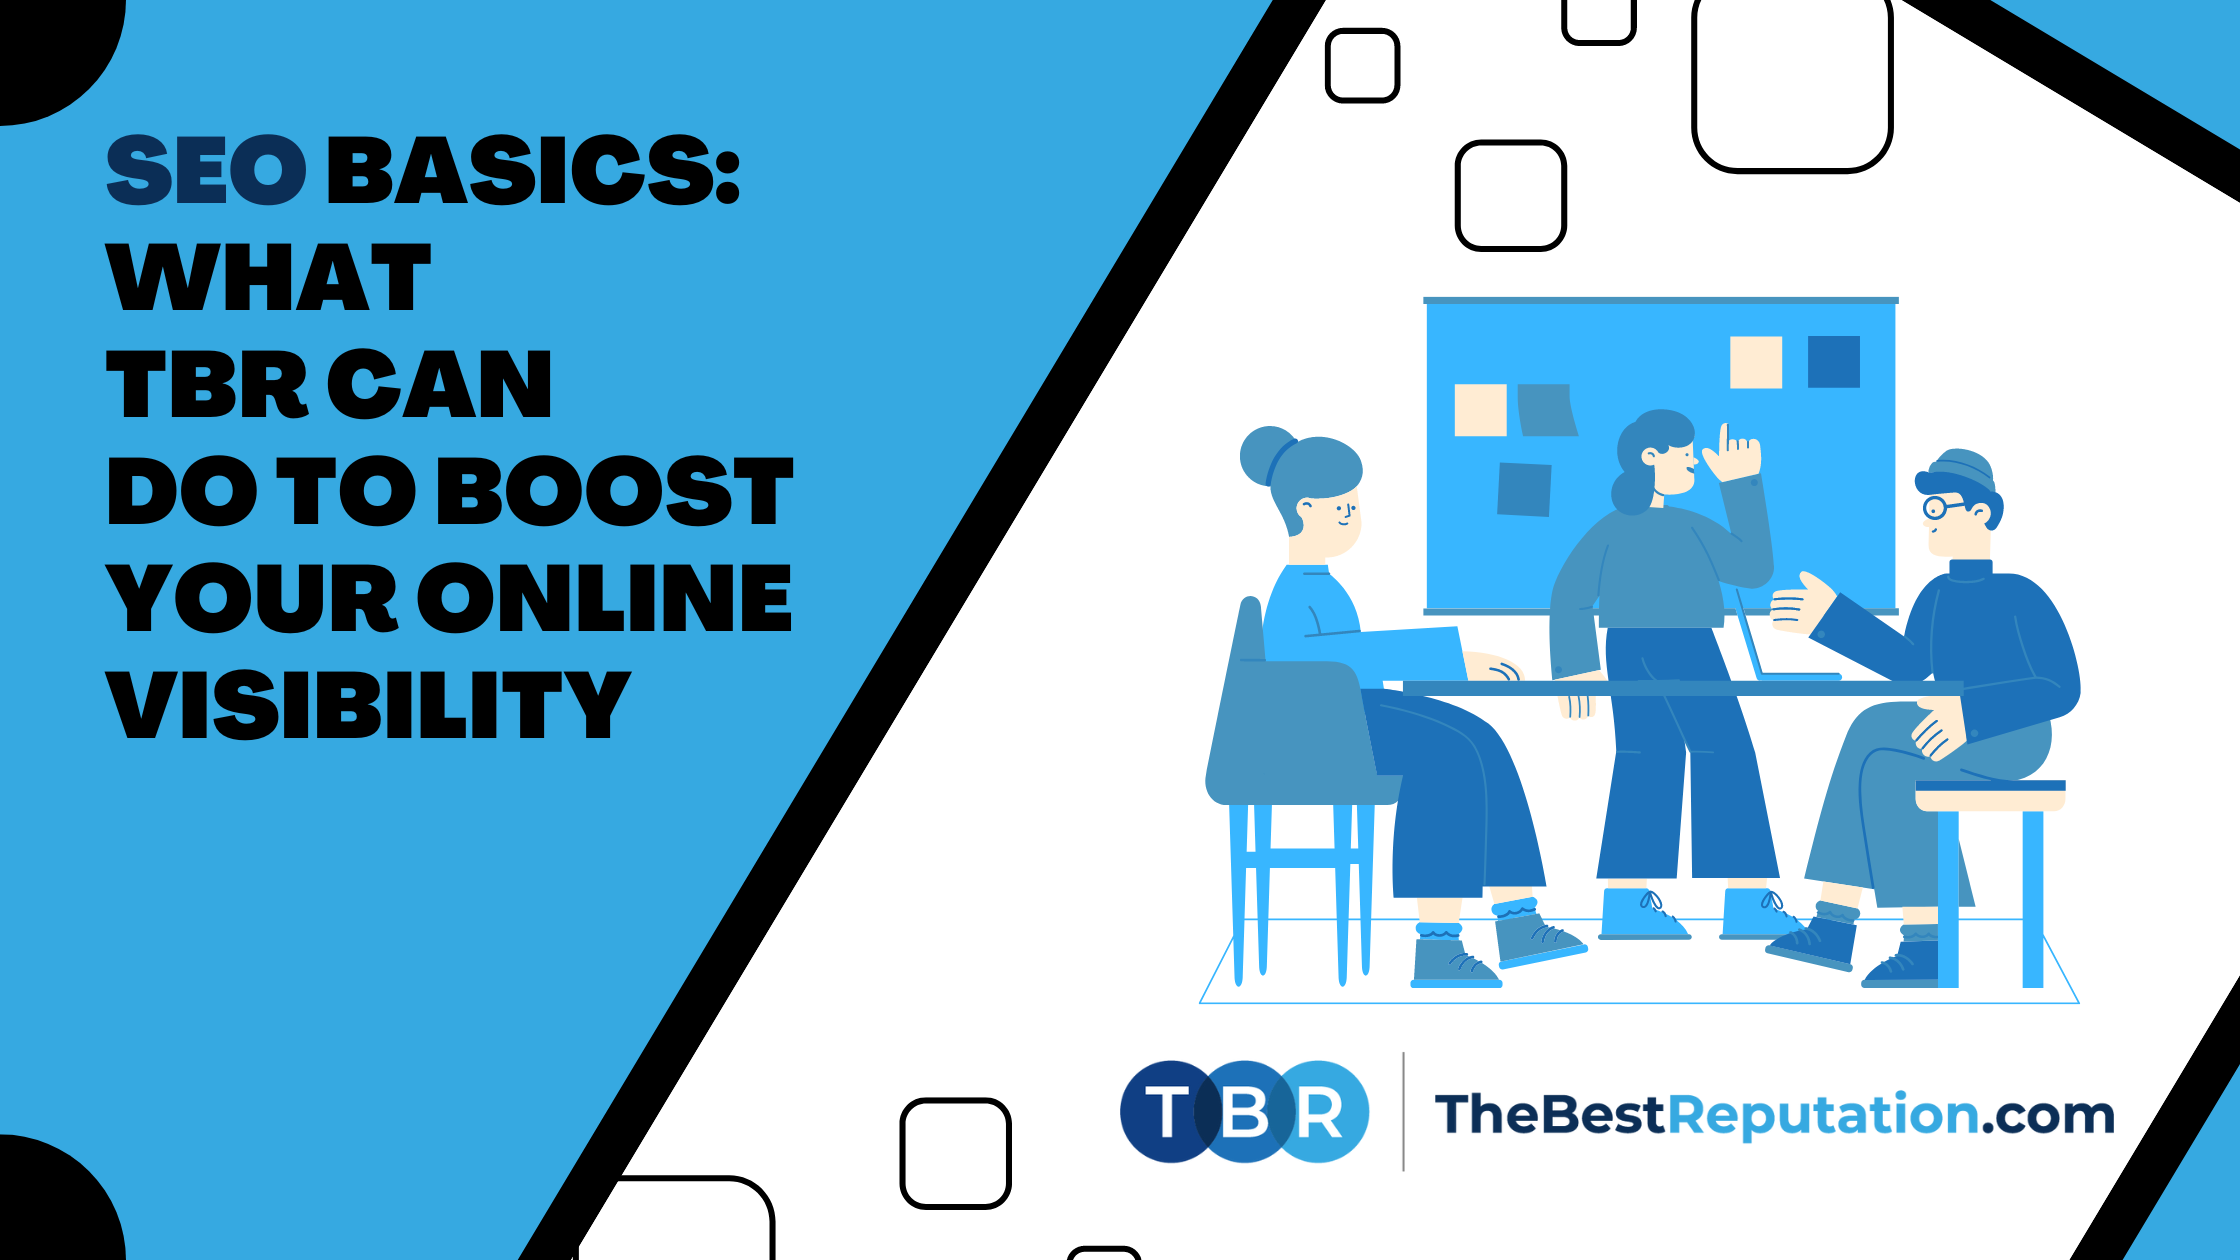 SEO Basics: What TheBestReputation Can Do to Boost Your Online Visibility